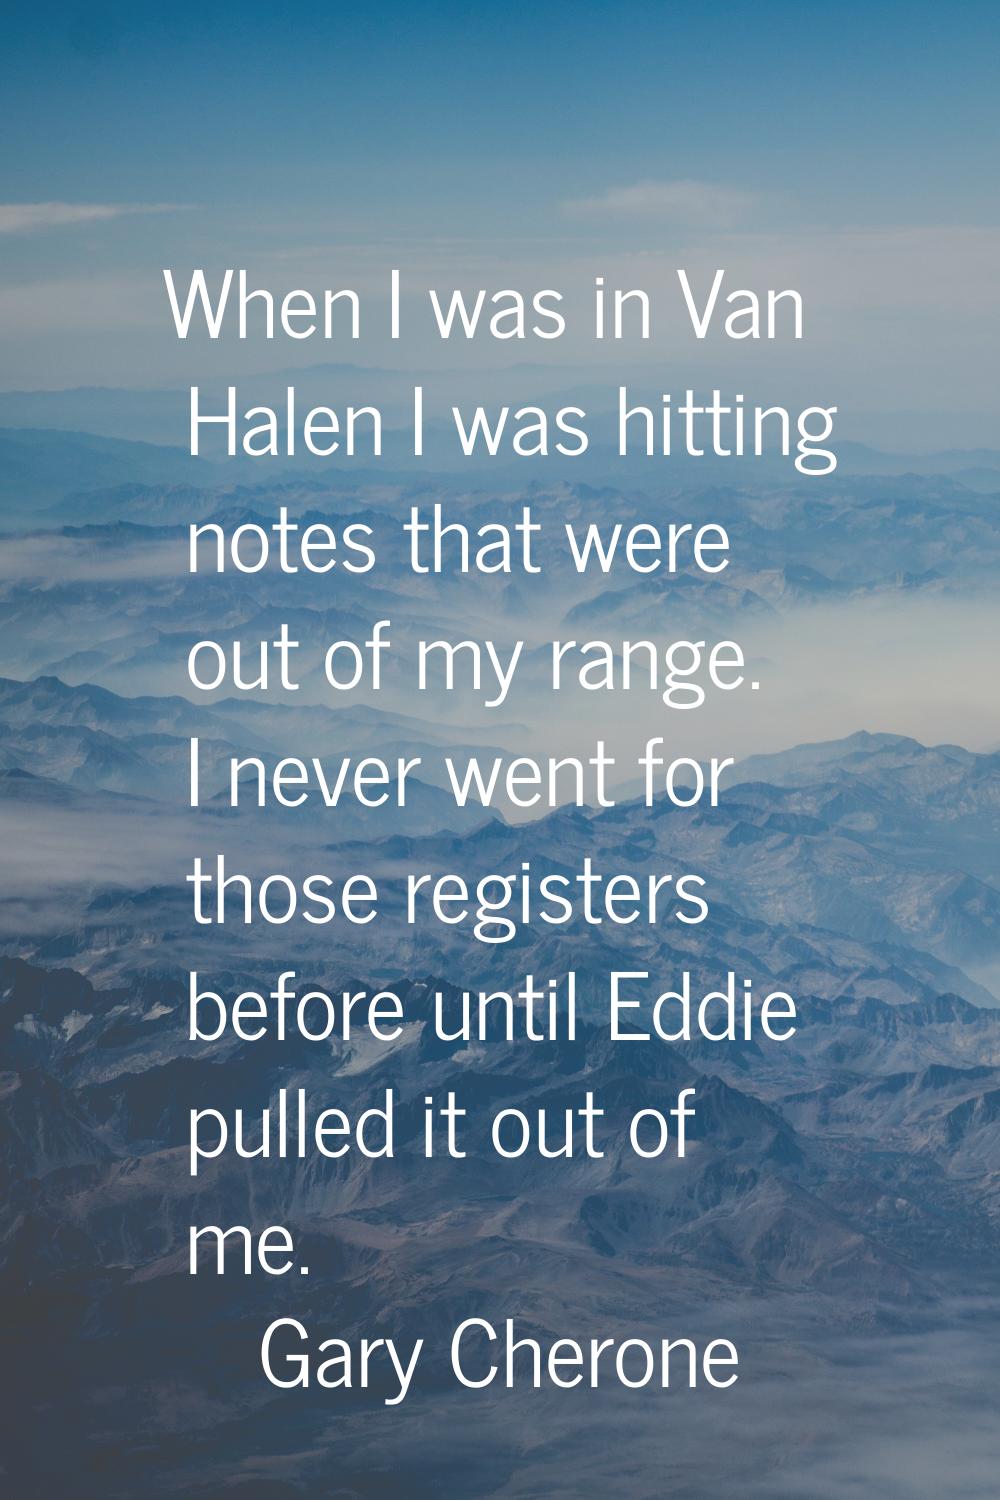 When I was in Van Halen I was hitting notes that were out of my range. I never went for those regis